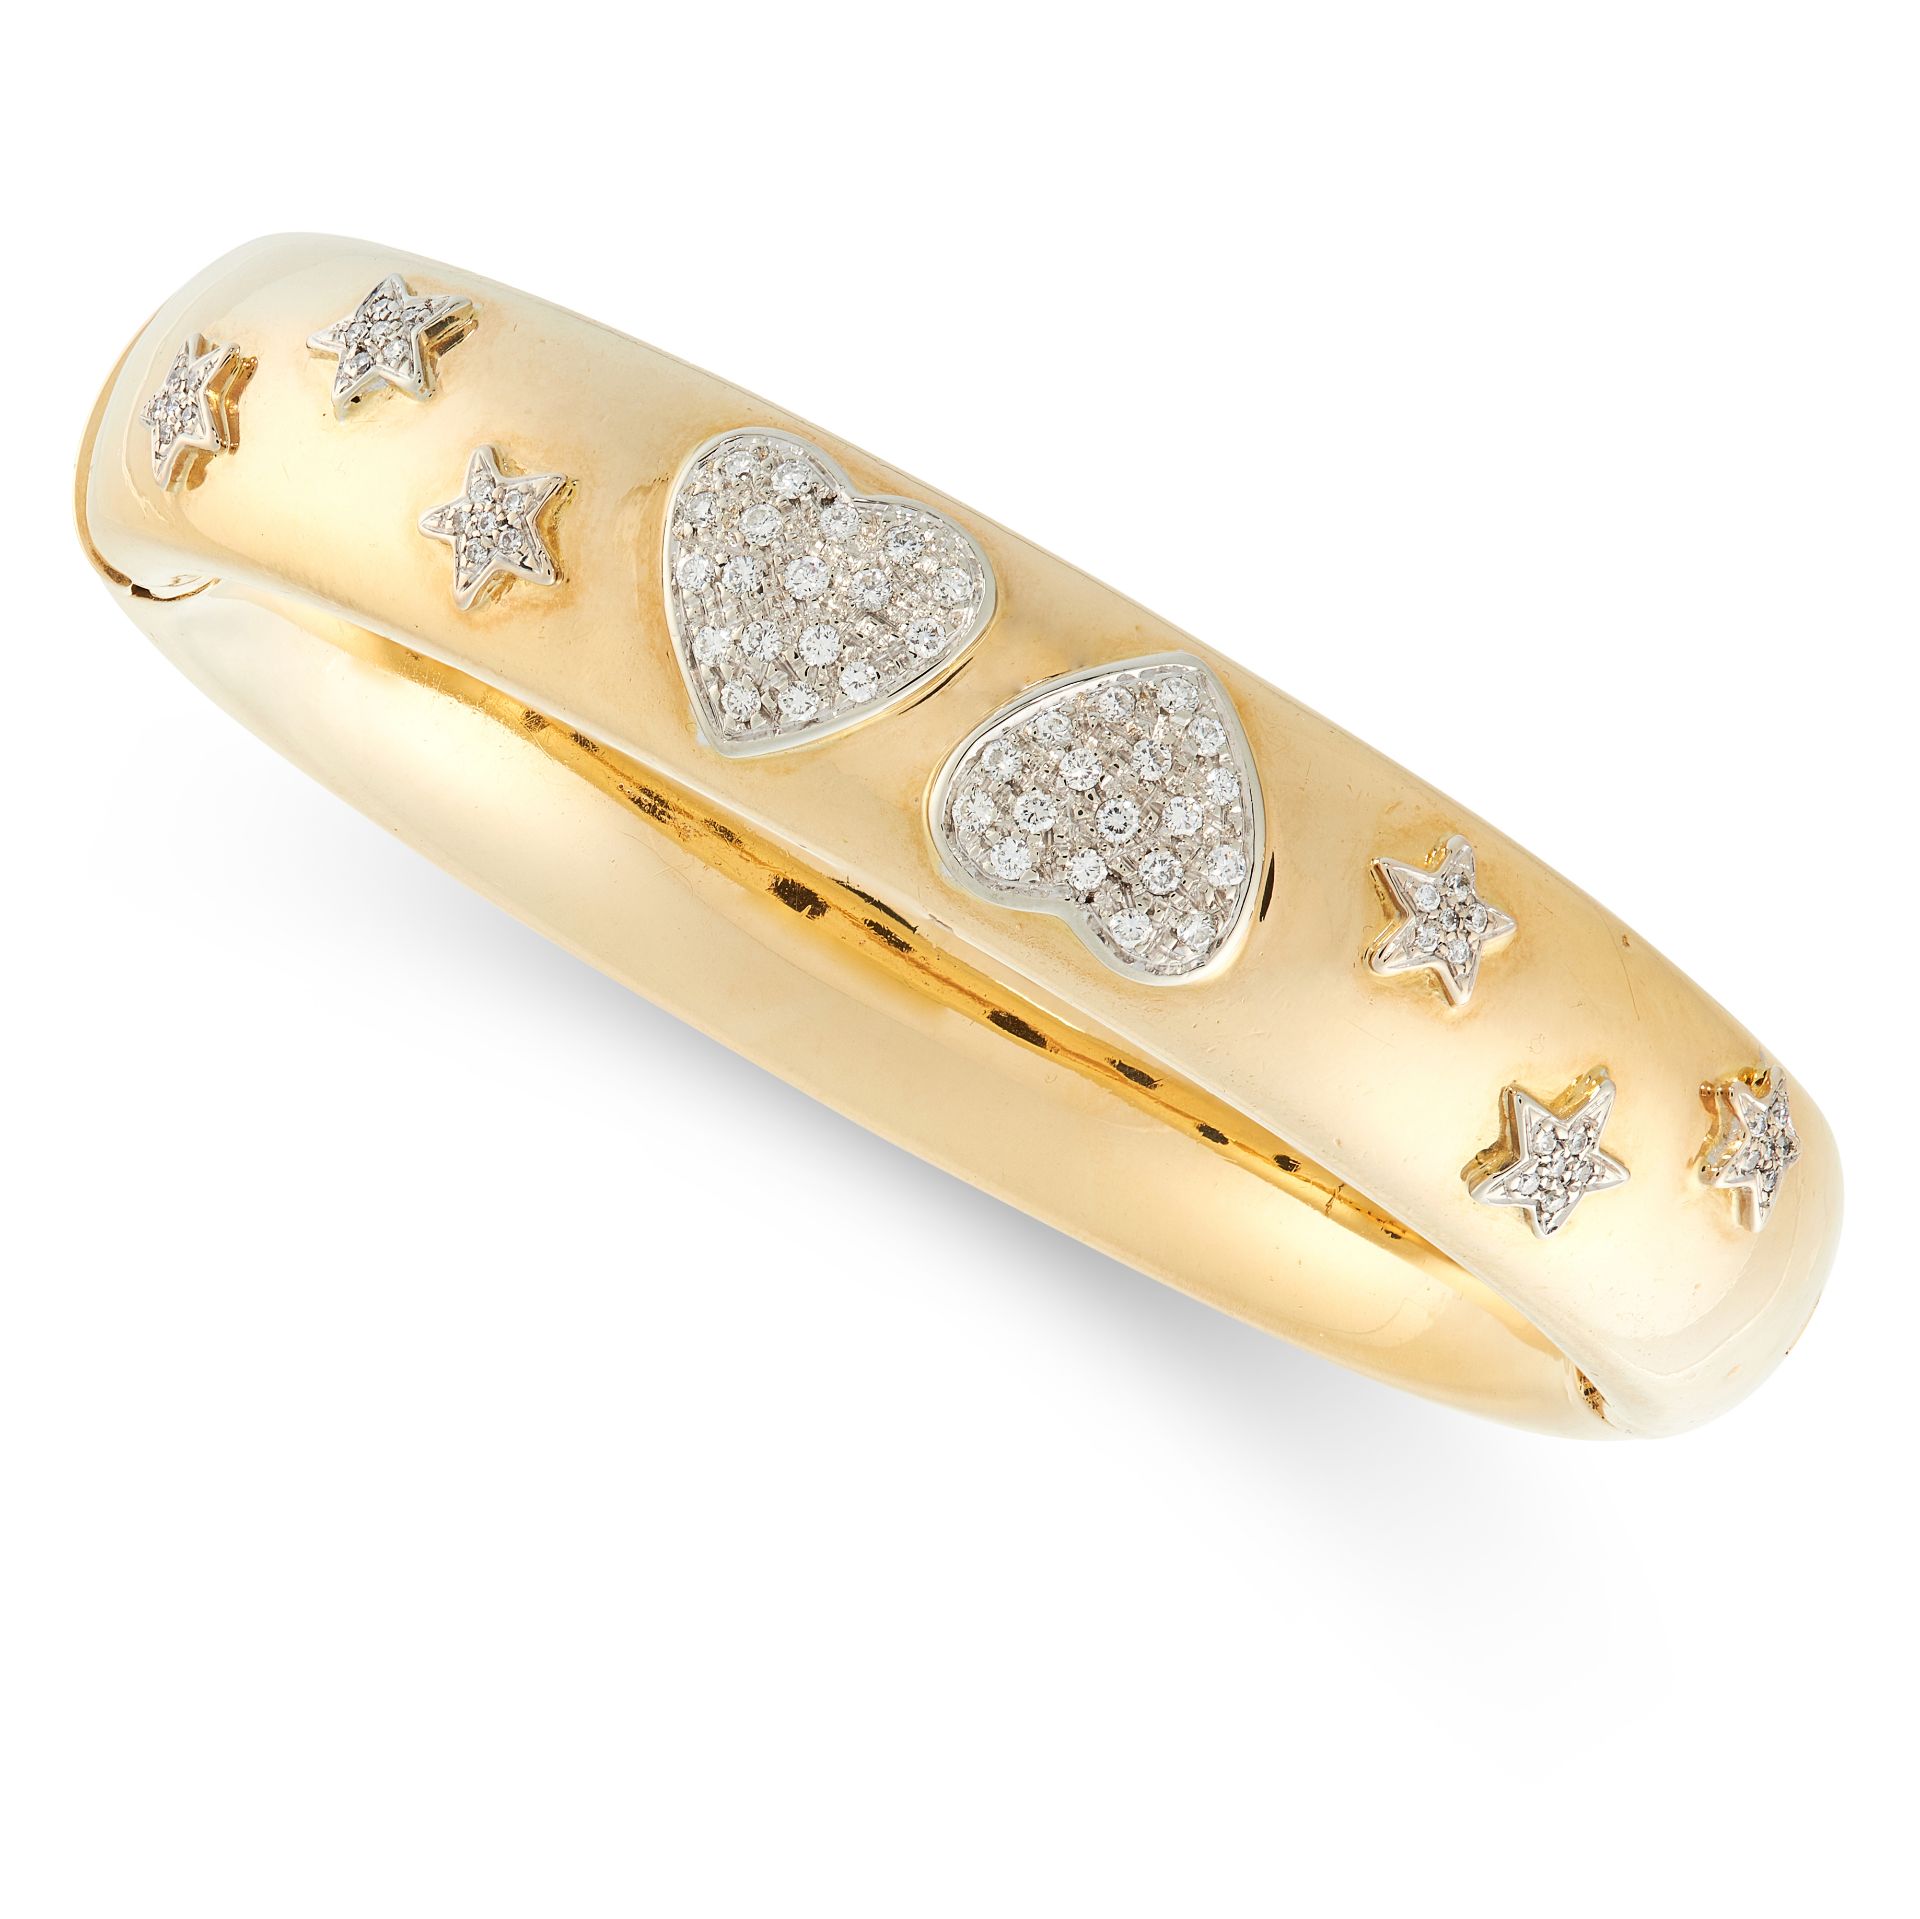 A DIAMOND BANGLE, POMELLATO in 18ct yellow gold, set with heart and star motifs, set with round